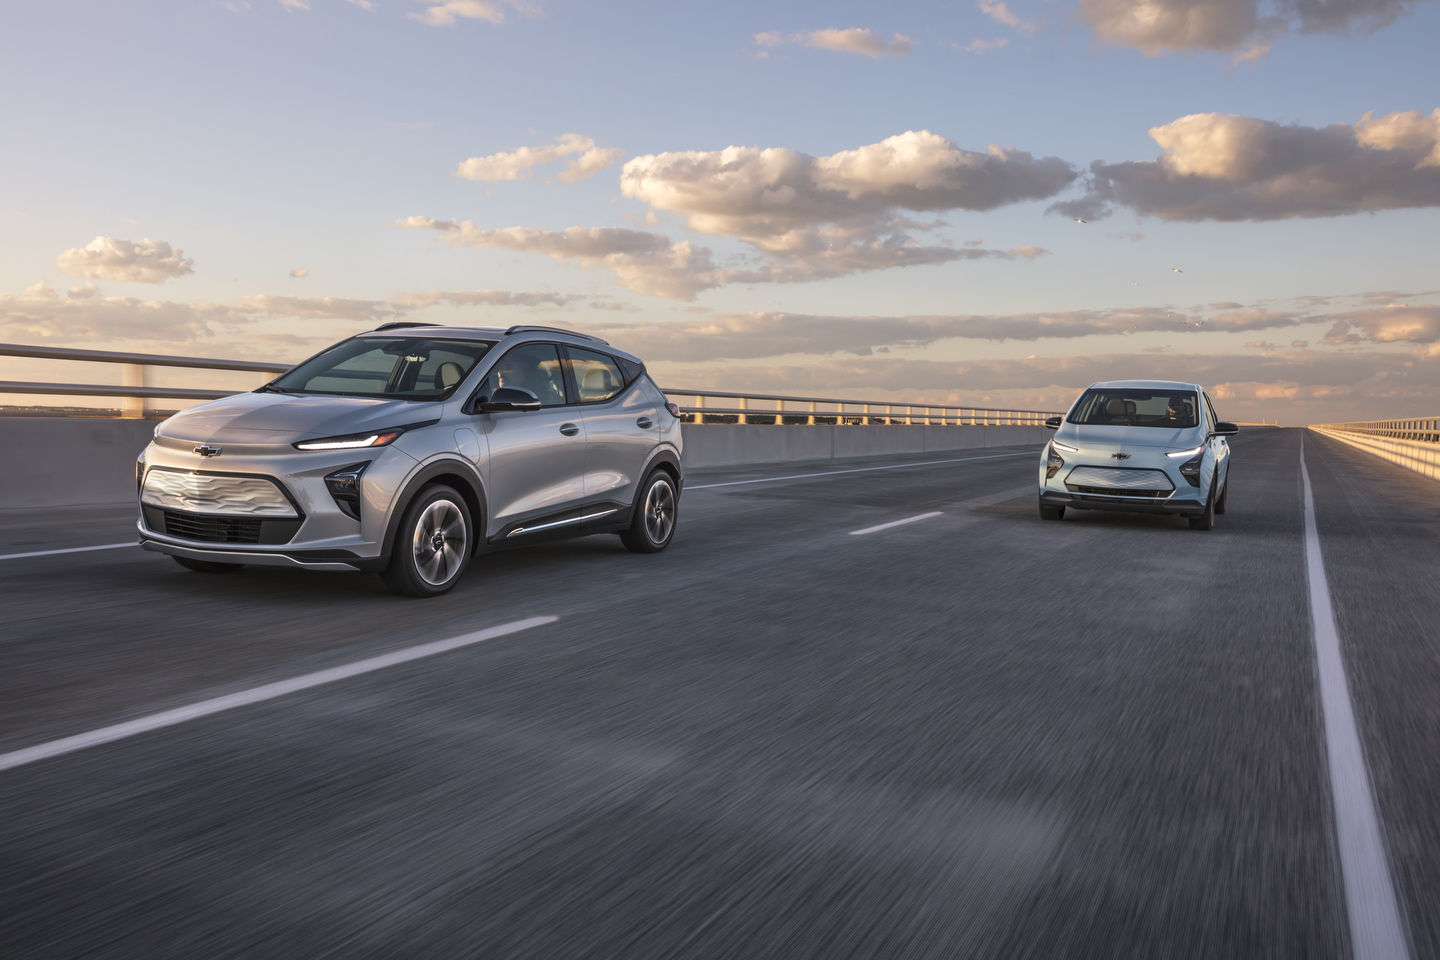 From Super Cruise to OnStar – Chevrolet Safety Features for 2023